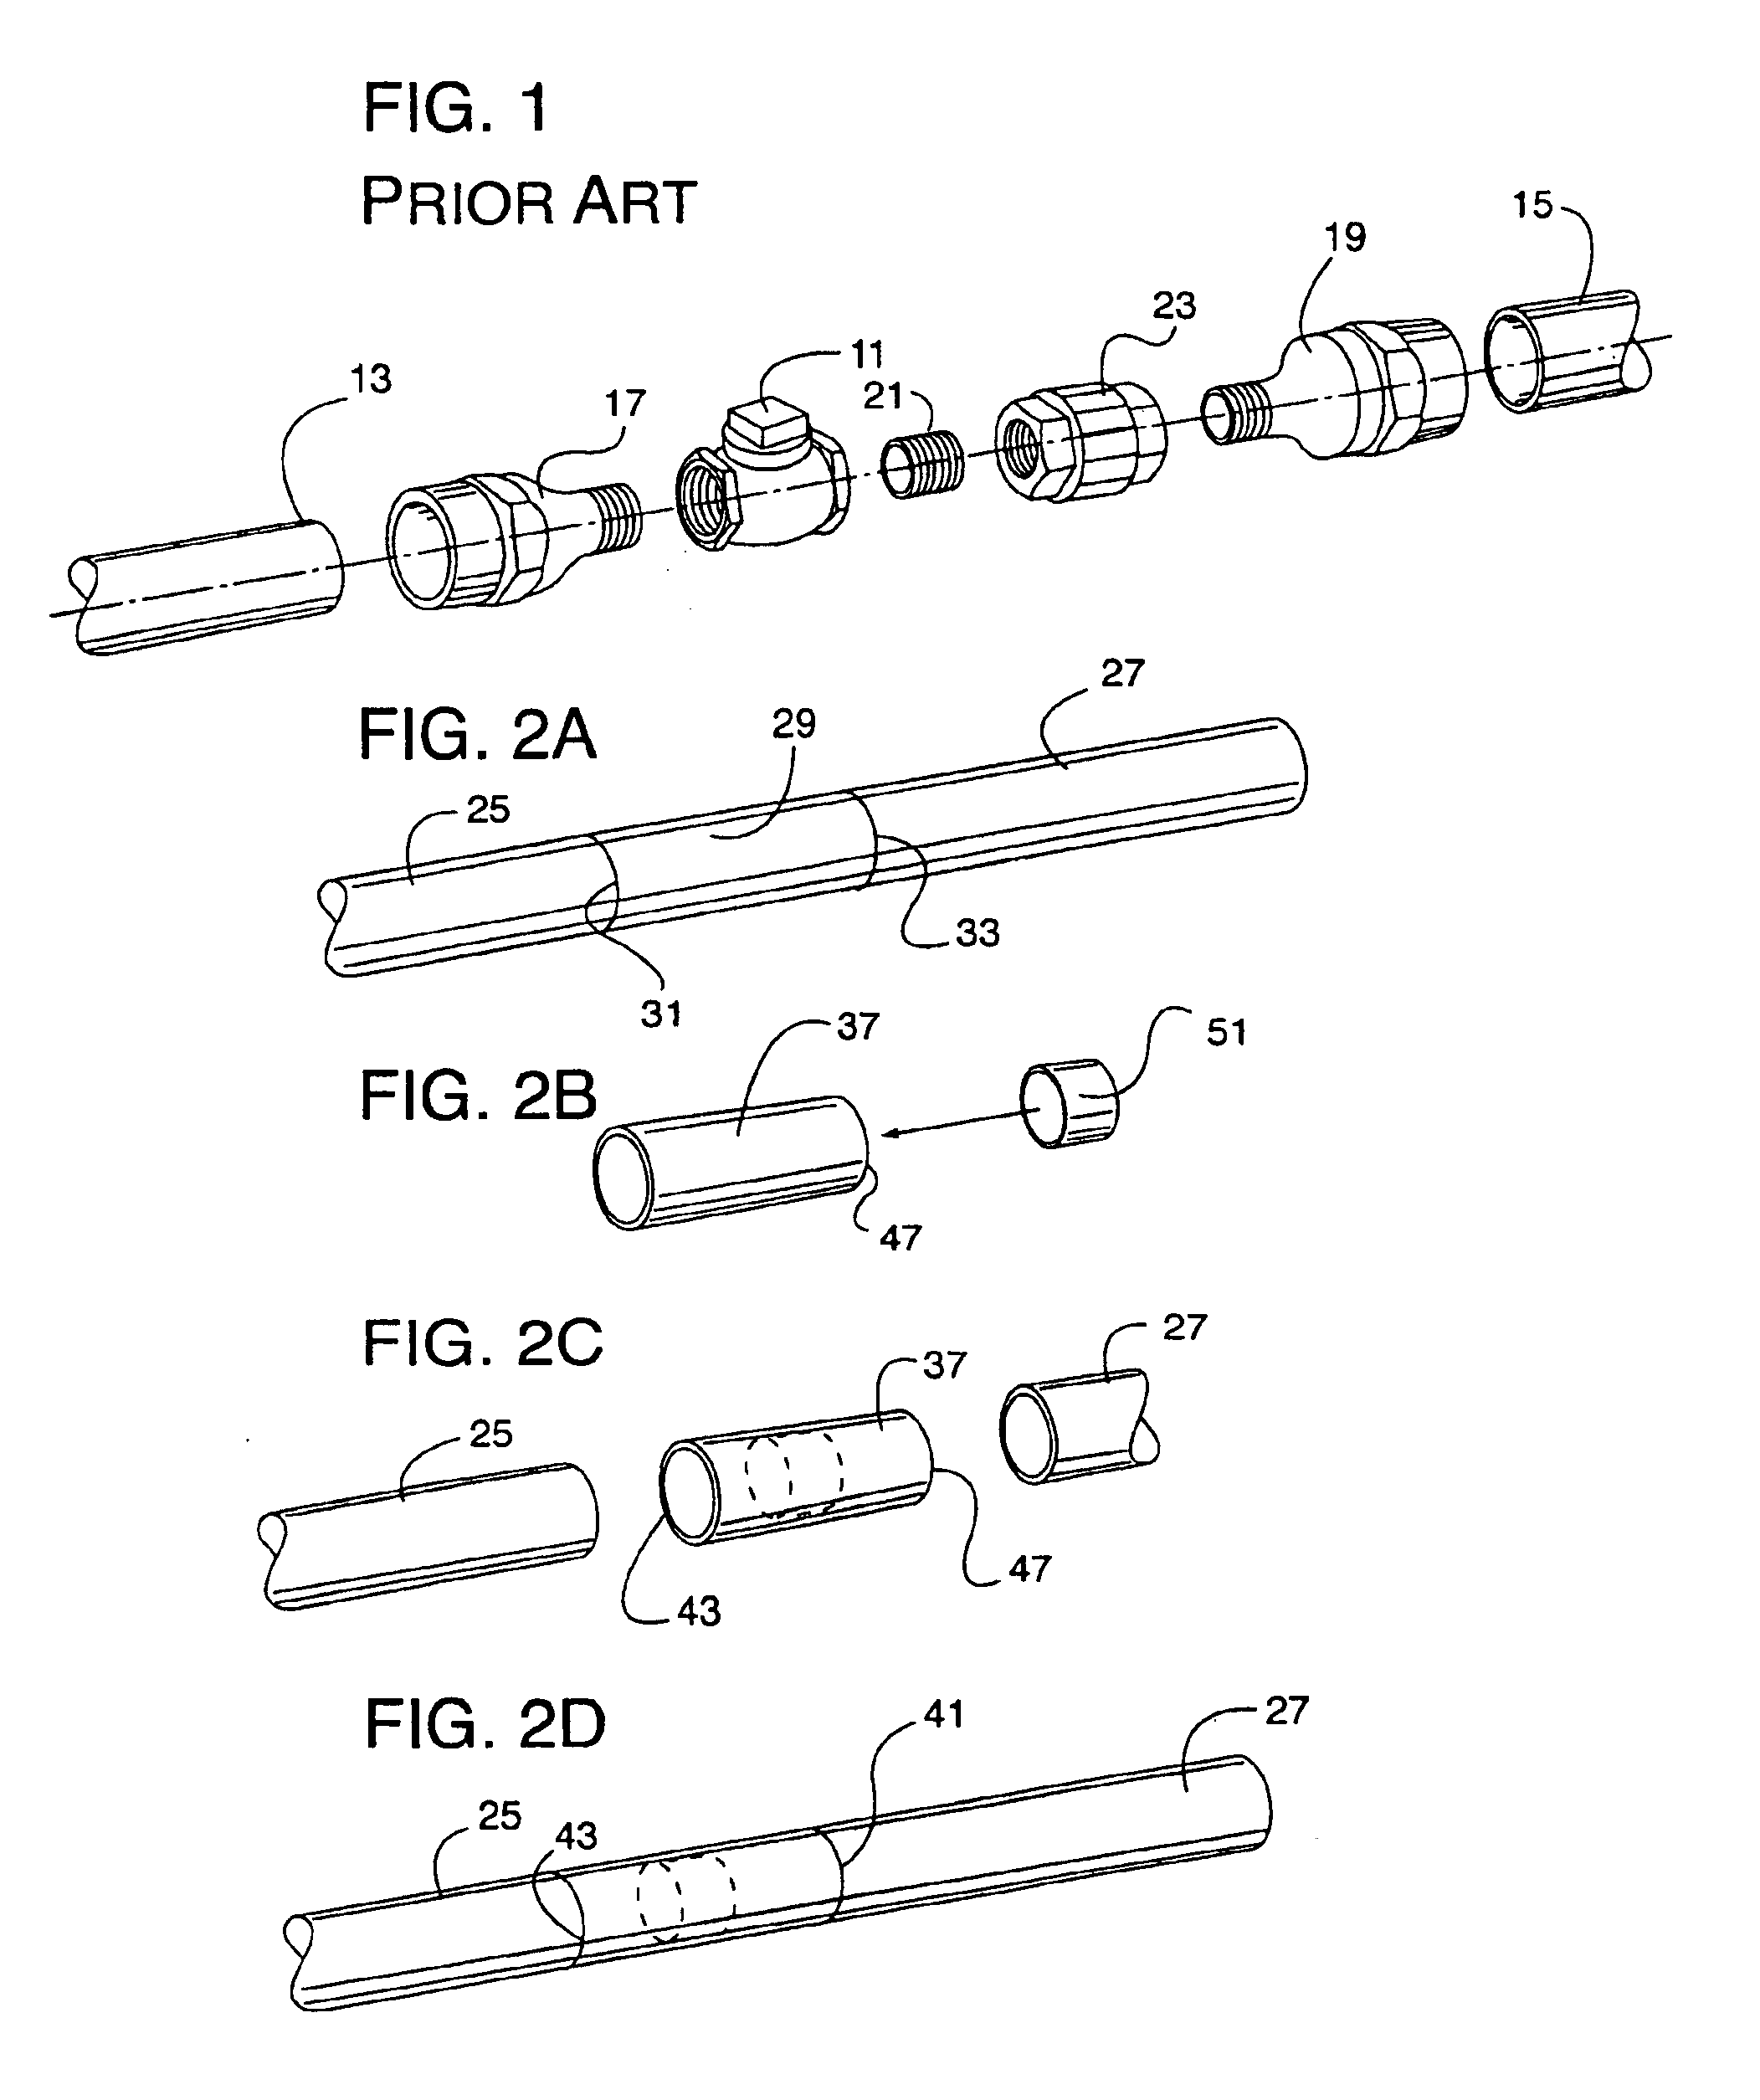 Back flow prevention device for pipelines conveying fluids